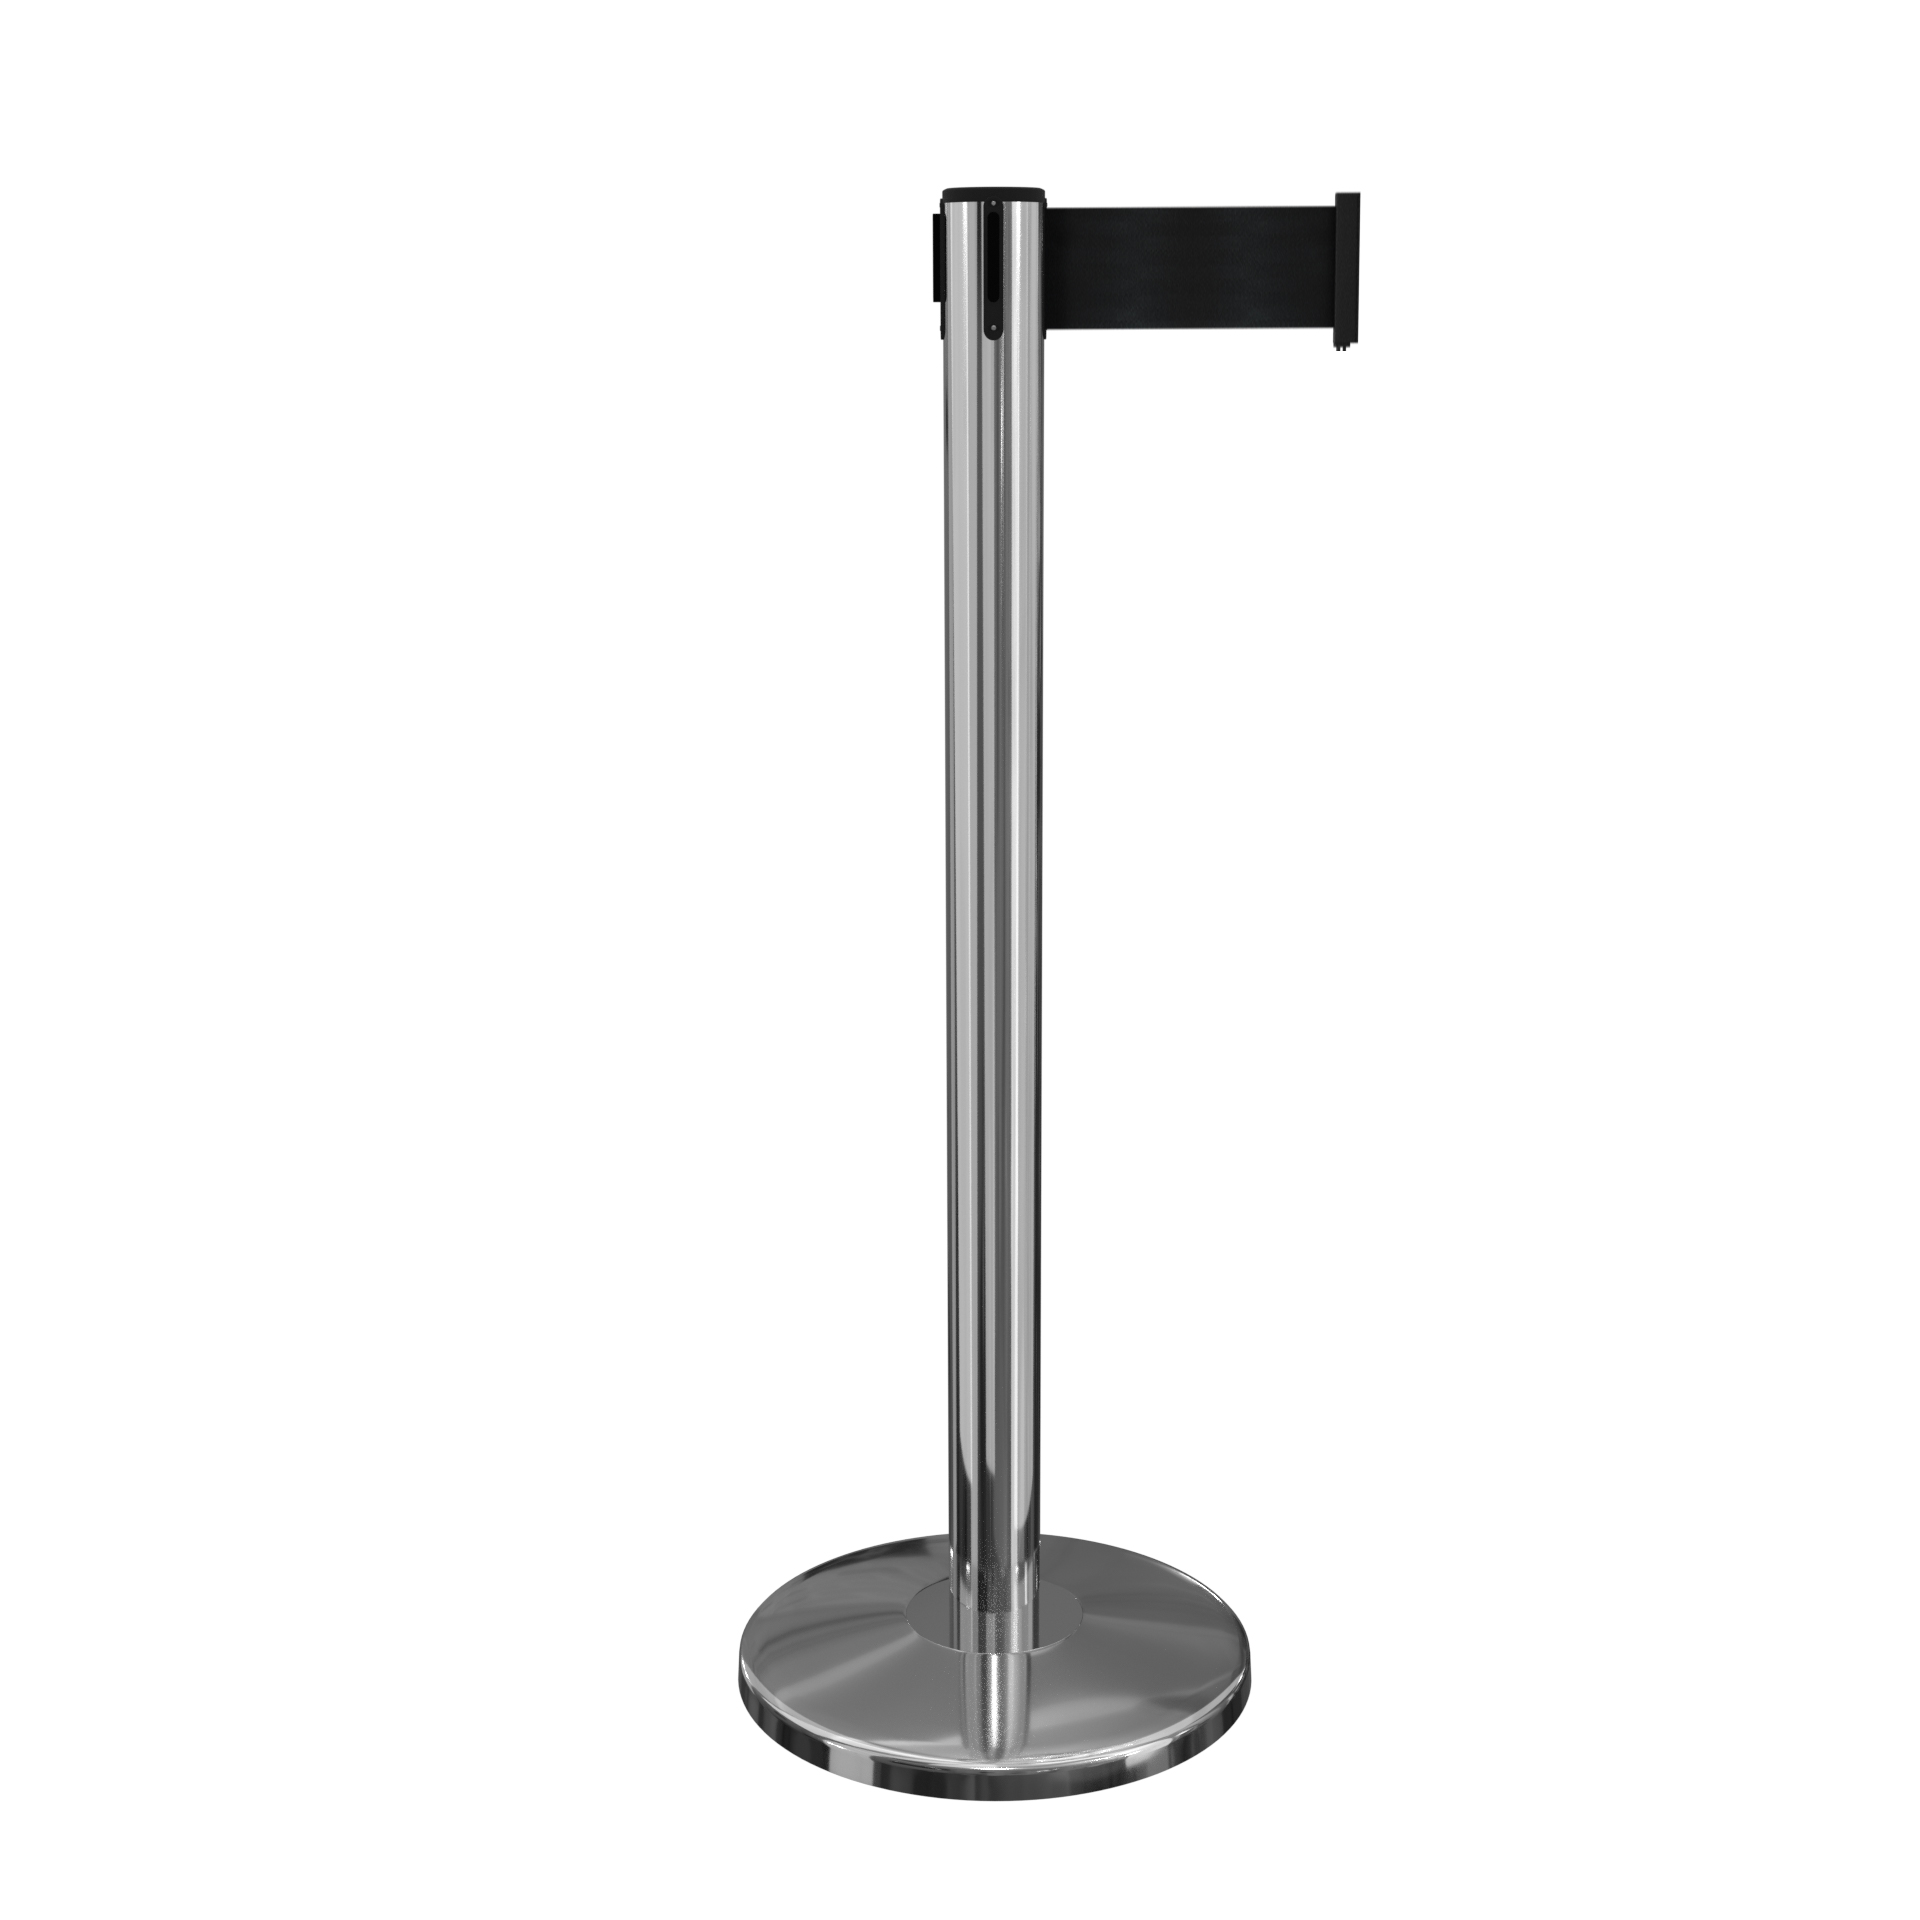 Polished Stainless Queuemaster 550 Retractable Belt Barrier with 3 Inch Belt